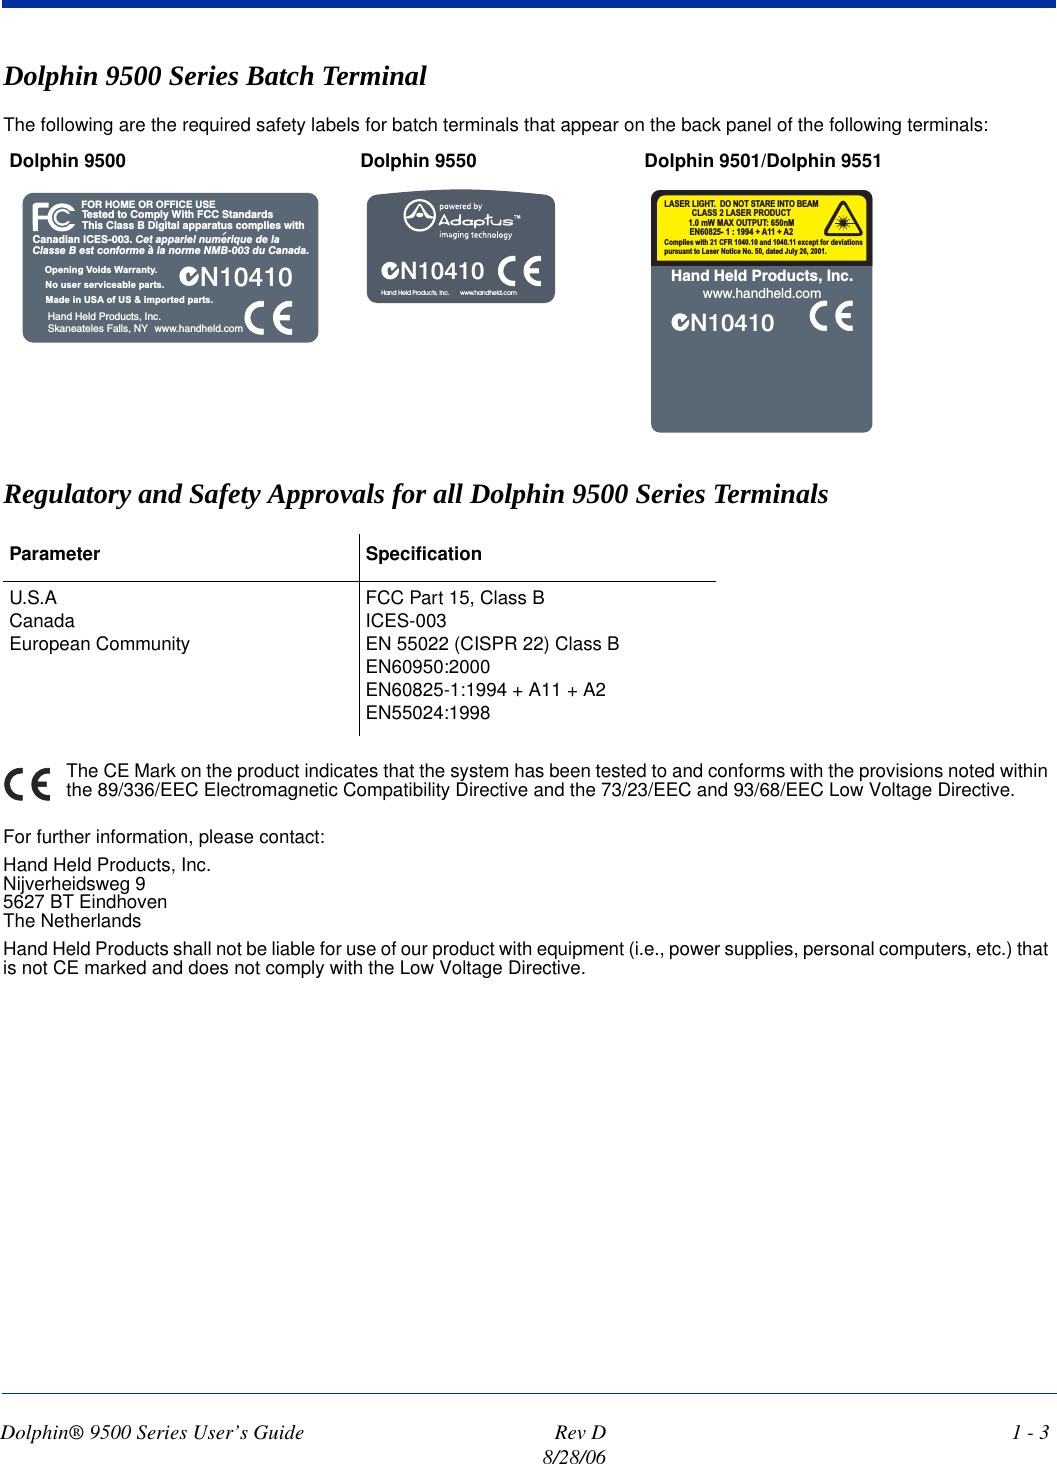 Dolphin® 9500 Series User’s Guide  Rev D8/28/061 - 3Dolphin 9500 Series Batch Terminal The following are the required safety labels for batch terminals that appear on the back panel of the following terminals: Regulatory and Safety Approvals for all Dolphin 9500 Series Terminals The CE Mark on the product indicates that the system has been tested to and conforms with the provisions noted within the 89/336/EEC Electromagnetic Compatibility Directive and the 73/23/EEC and 93/68/EEC Low Voltage Directive.For further information, please contact:Hand Held Products, Inc.Nijverheidsweg 95627 BT EindhovenThe NetherlandsHand Held Products shall not be liable for use of our product with equipment (i.e., power supplies, personal computers, etc.) that is not CE marked and does not comply with the Low Voltage Directive.Dolphin 9500  Dolphin 9550 Dolphin 9501/Dolphin 9551Parameter SpecificationU.S.ACanadaEuropean CommunityFCC Part 15, Class BICES-003EN 55022 (CISPR 22) Class BEN60950:2000EN60825-1:1994 + A11 + A2EN55024:1998Tested to Comply With FCC StandardsThis Class B Digital apparatus complies withFOR HOME OR OFFICE USECanadian ICES-003. Cet appariel numerique de laClasse B est conforme a la norme NMB-003 du Canada.N10410Hand Held Products, Inc.Skaneateles Falls, NYMade in USA of US &amp; imported parts.No user serviceable parts.Opening Voids Warranty.www.handheld.comN10410Hand Held Products, Inc.      www.handheld.comN10410Hand Held Products, Inc.www.handheld.comComplies with 21 CFR 1040.10 and 1040.11 except for deviationspursuant to Laser Notice No. 50, dated July 26, 2001.LASER LIGHT. DO NOT STARE INTO BEAM1.0 mW MAX OUTPUT: 650nMEN60825- 1 : 1994 + A11 + A2CLASS 2 LASER PRODUCT